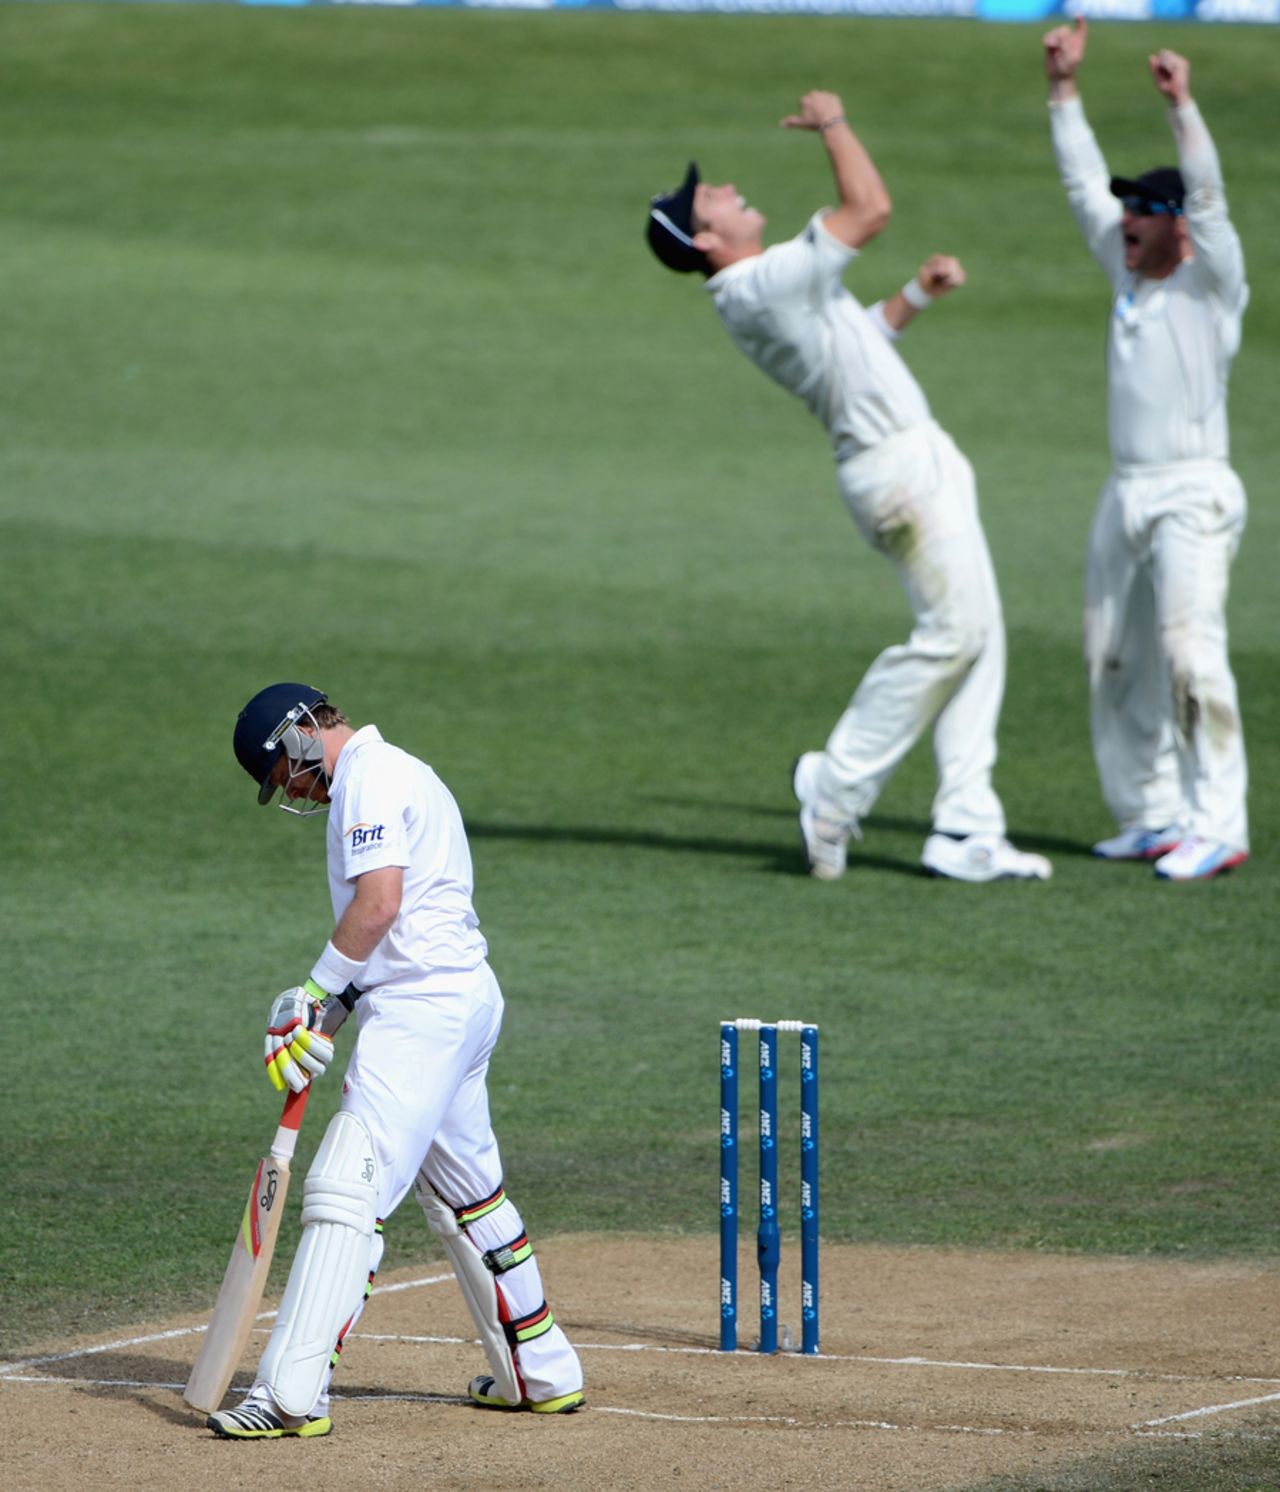 Ian Bell and New Zealand's fielders show contrasting emotions at his dismissal, New Zealand v England, 3rd Test, Auckland, 5th day, March 26, 2013